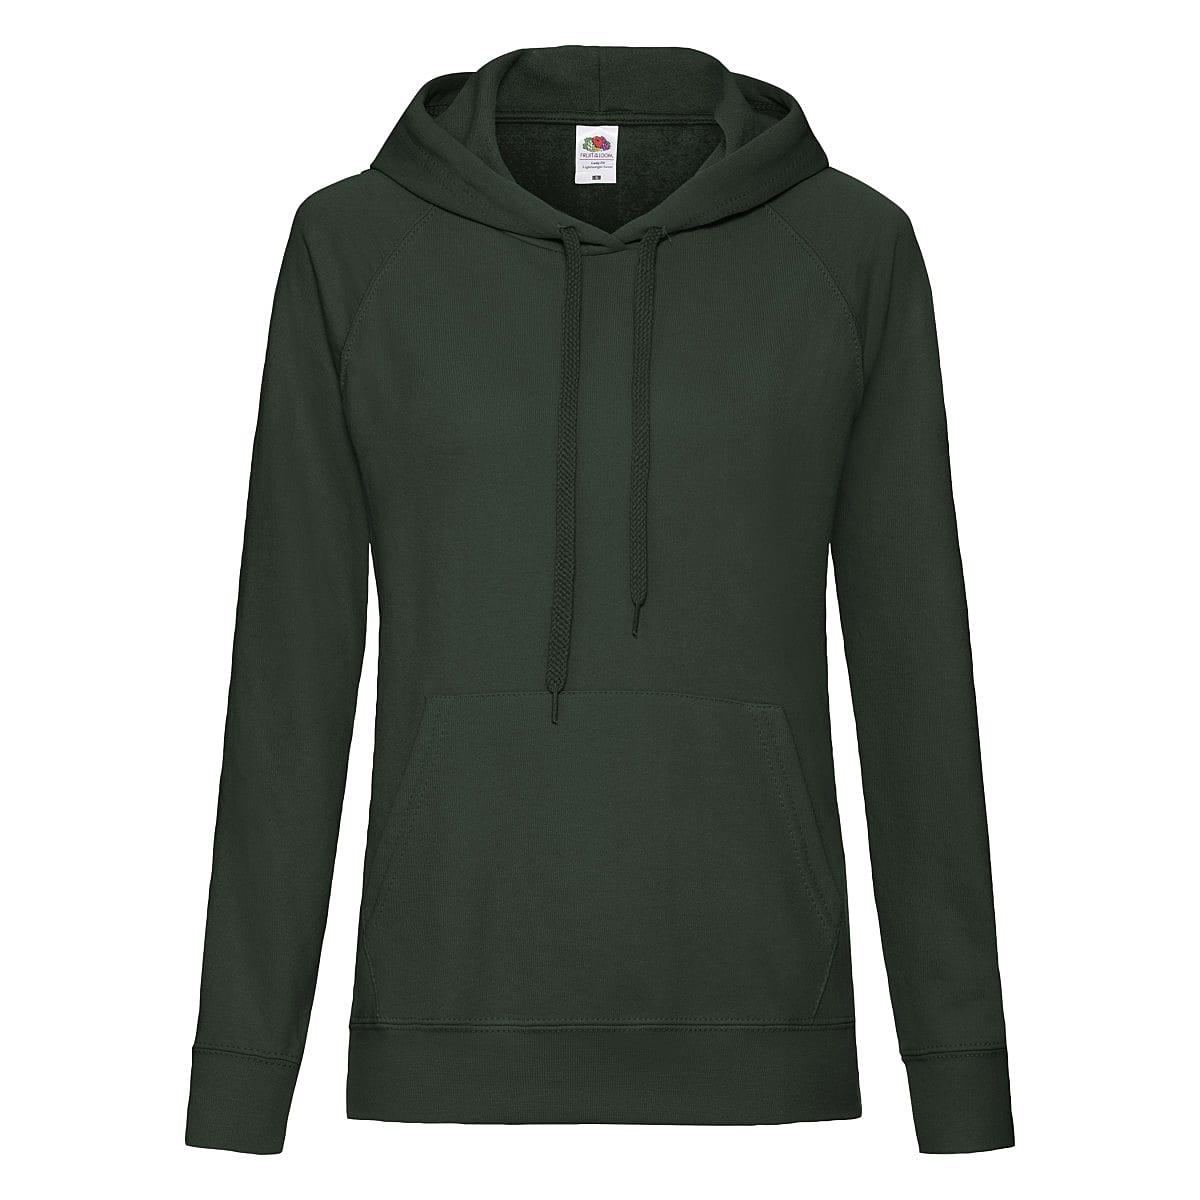 Fruit Of The Loom Lady-Fit Lightweight Hoodie in Bottle Green (Product Code: 62148)